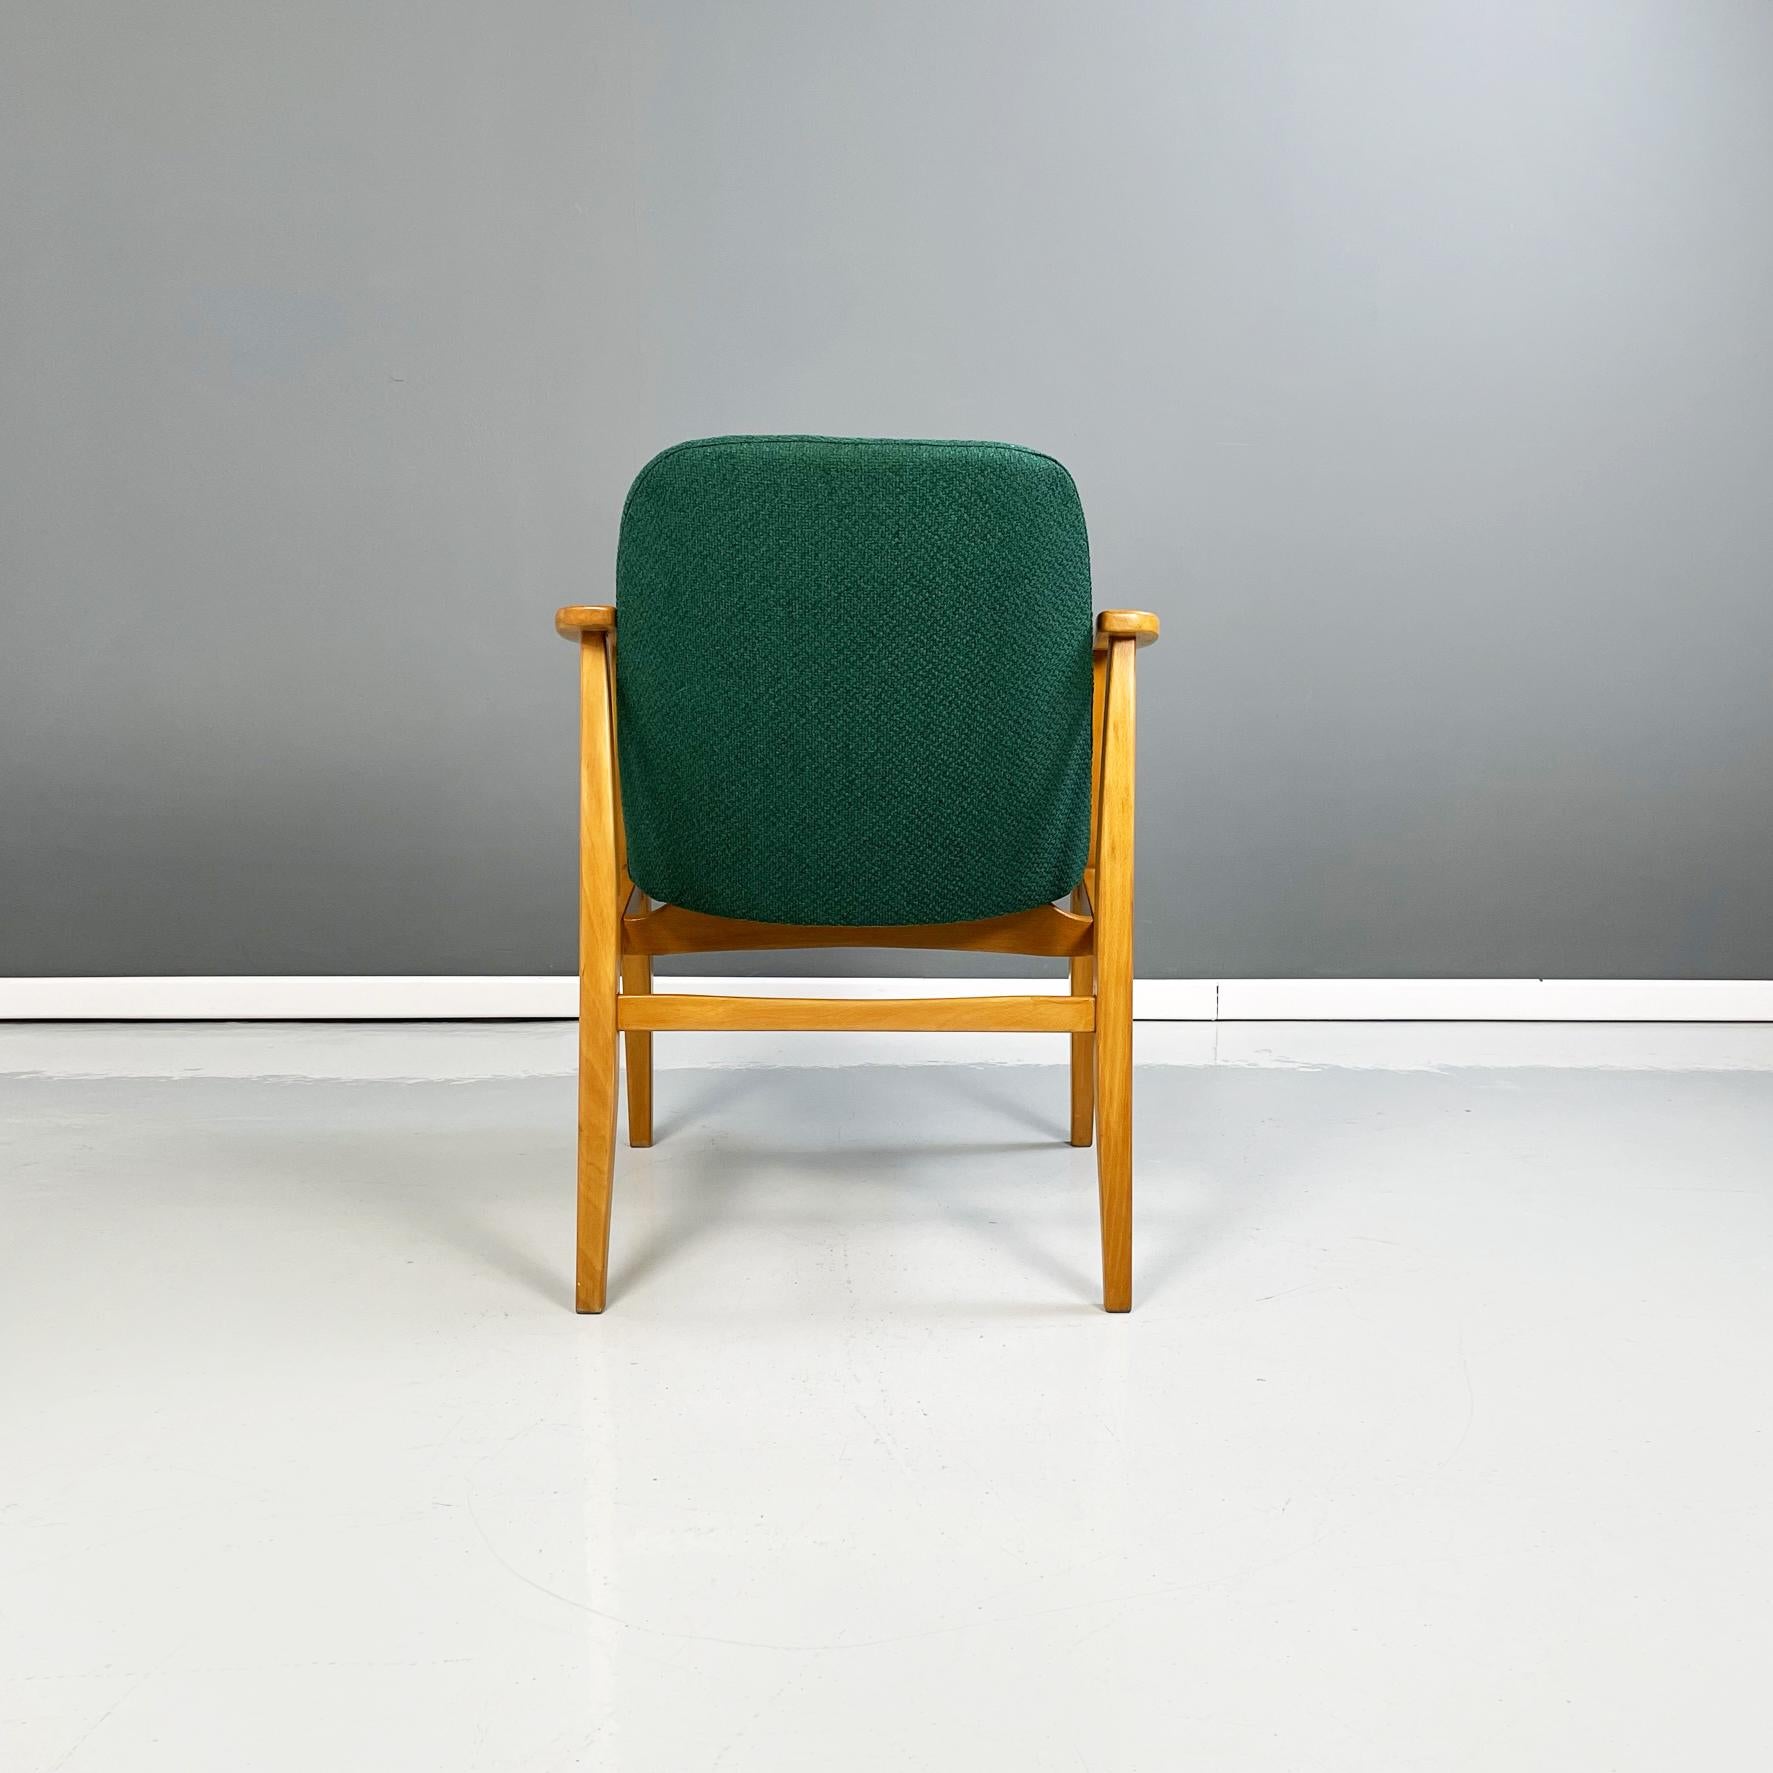 Danish Mid-Century Modern Armchairs in Forest Green Fabric and Wood, 1960s For Sale 3